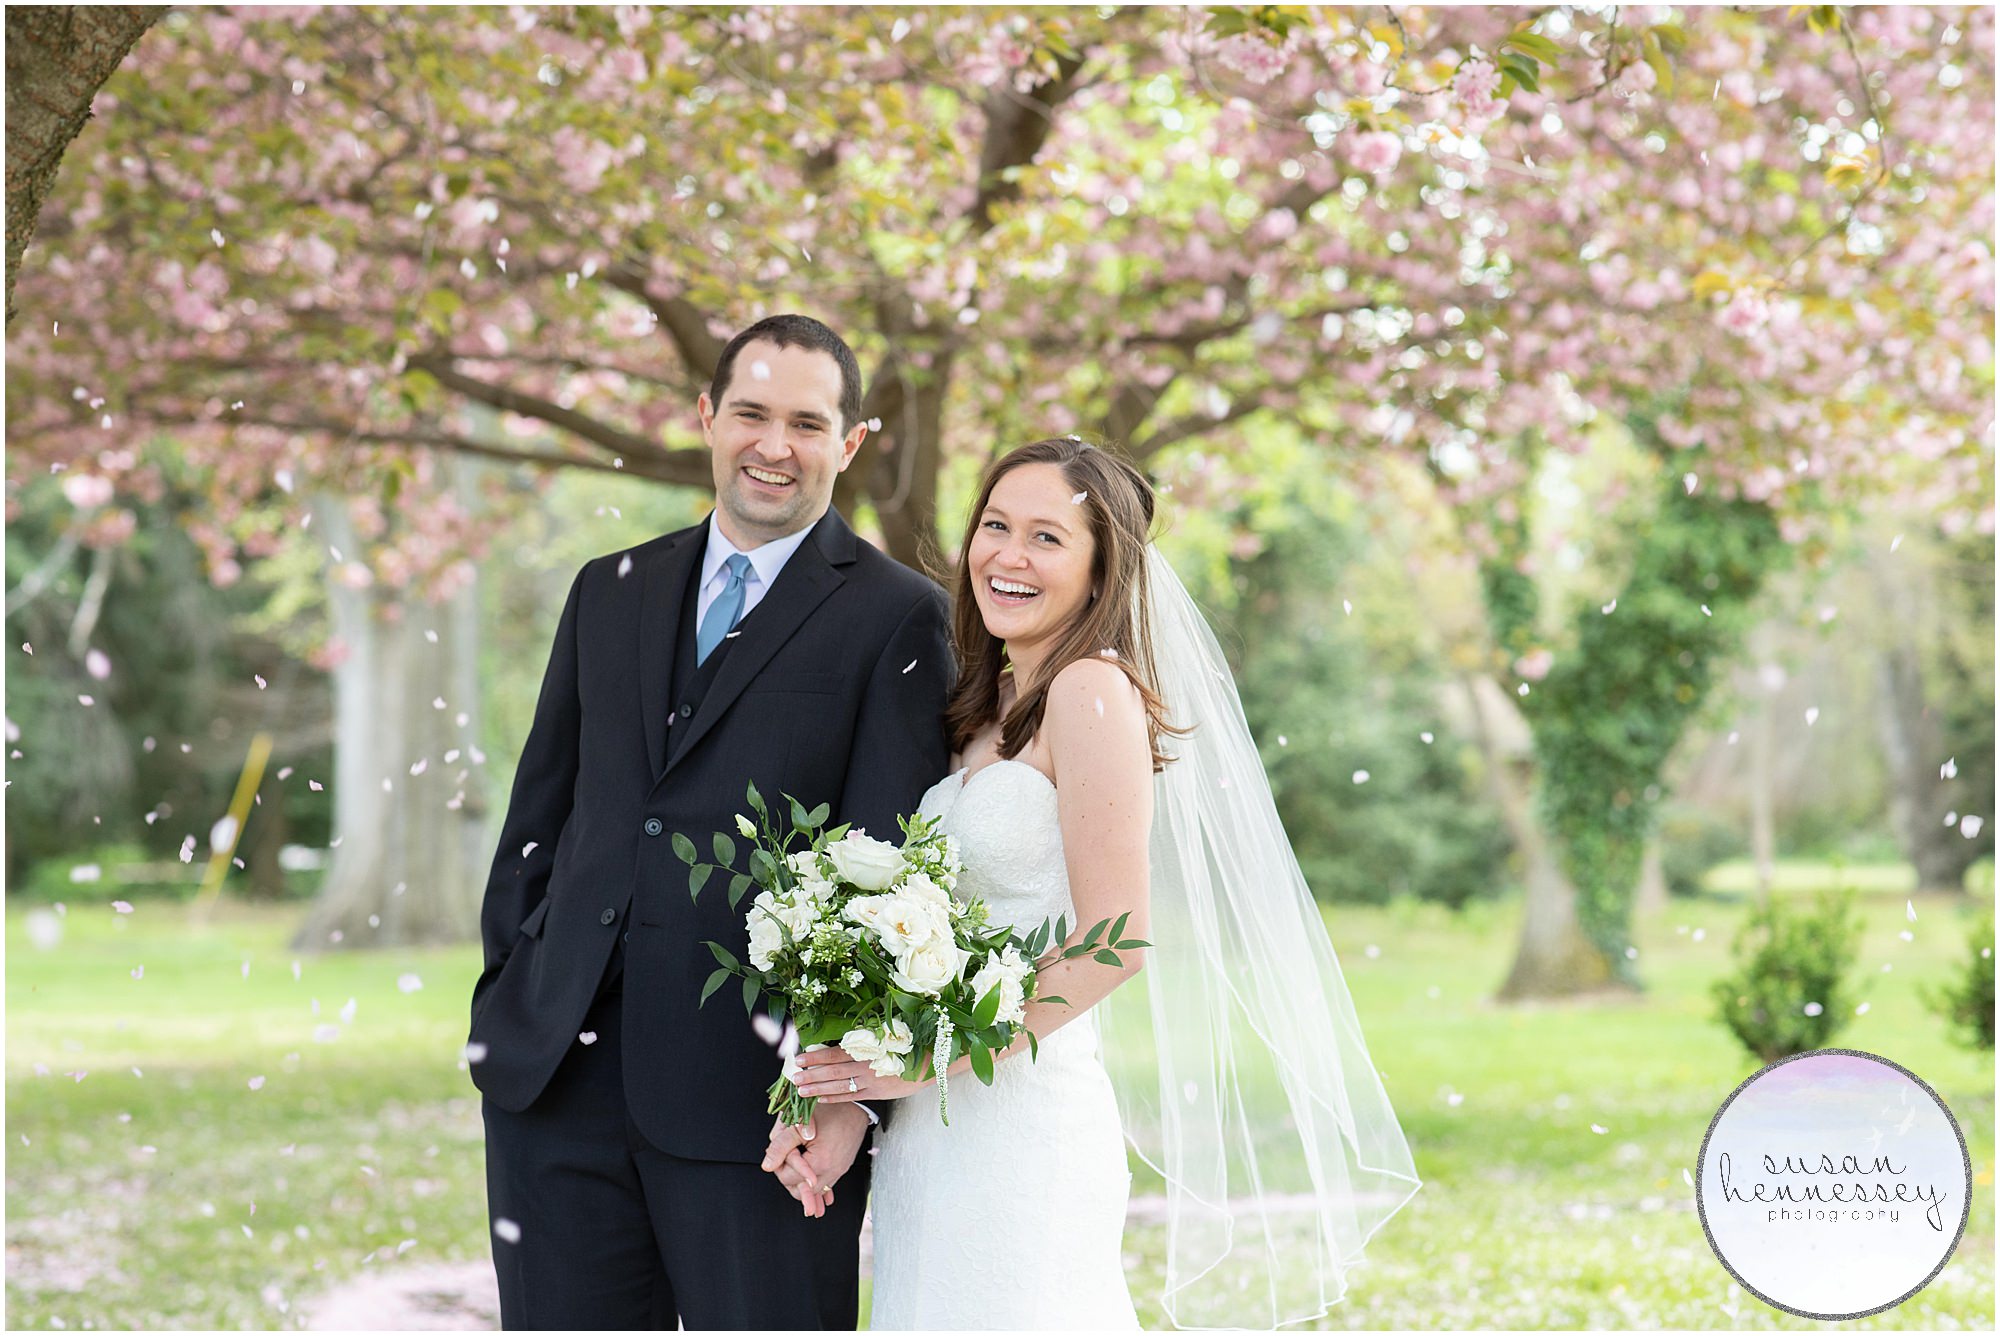 NJ Micro Wedding photography by Susan Hennessey Photography during cherry blossom season